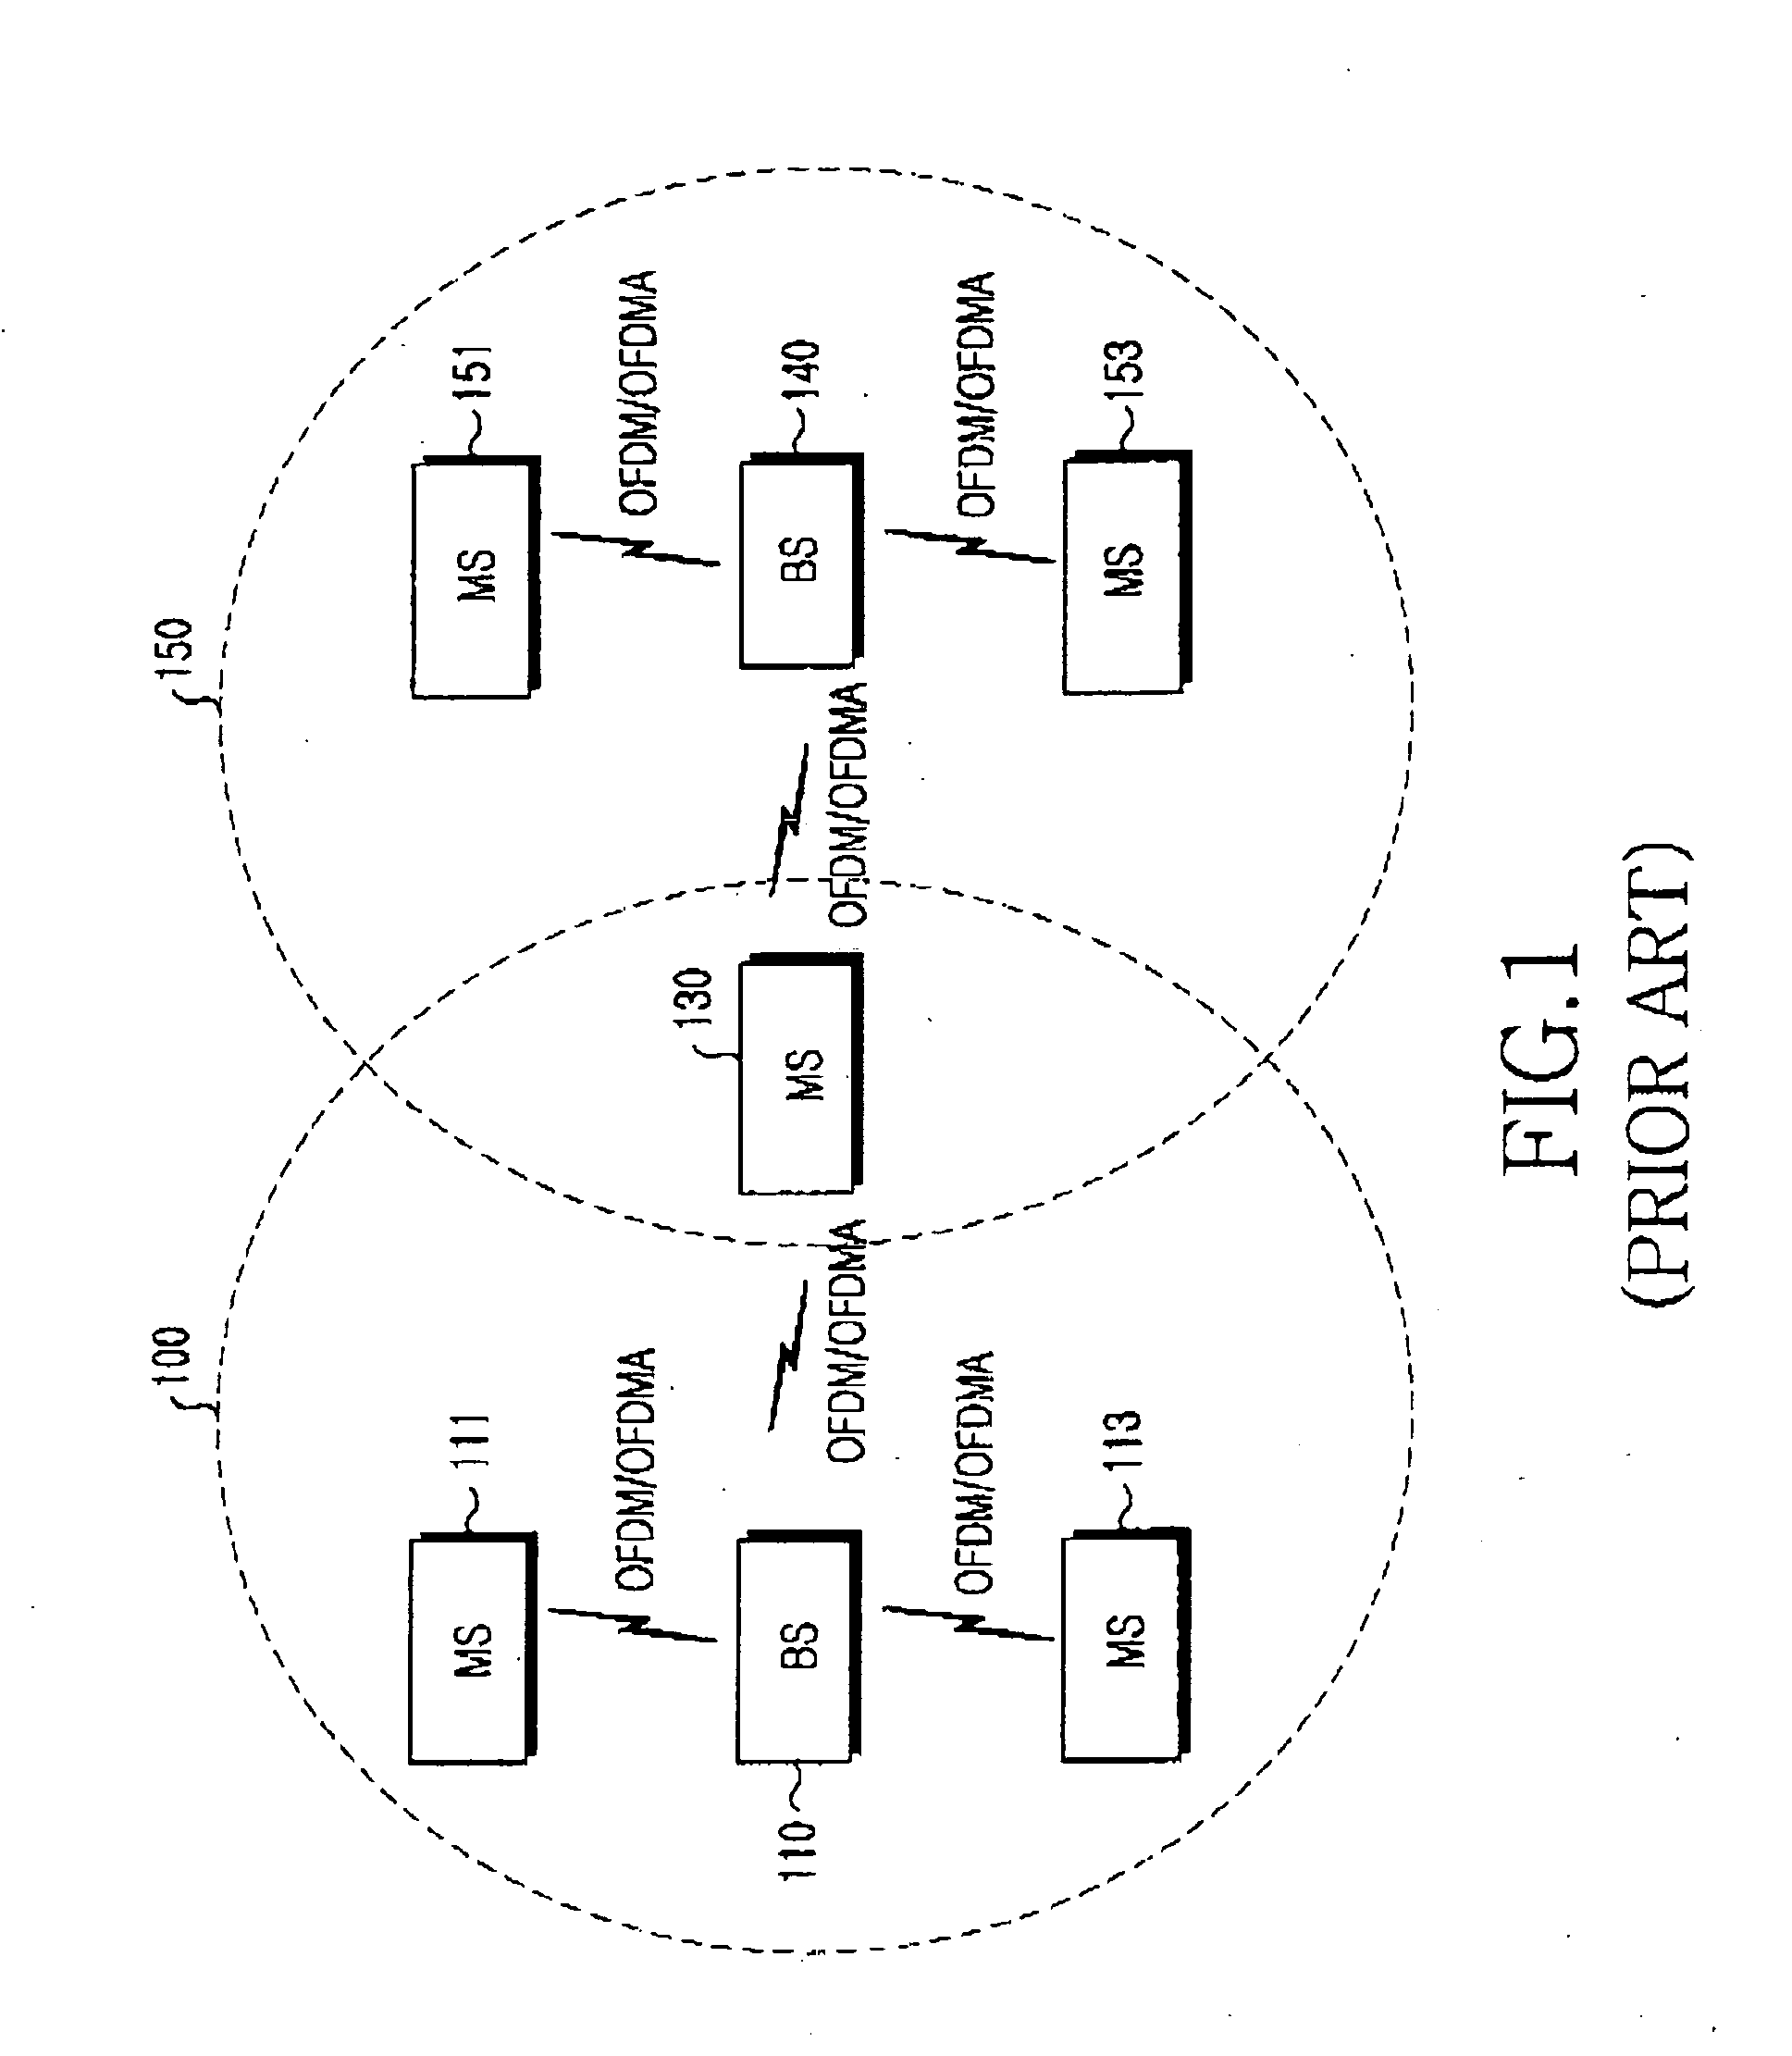 System and method for providing services using the same frequency in a wireless communication system